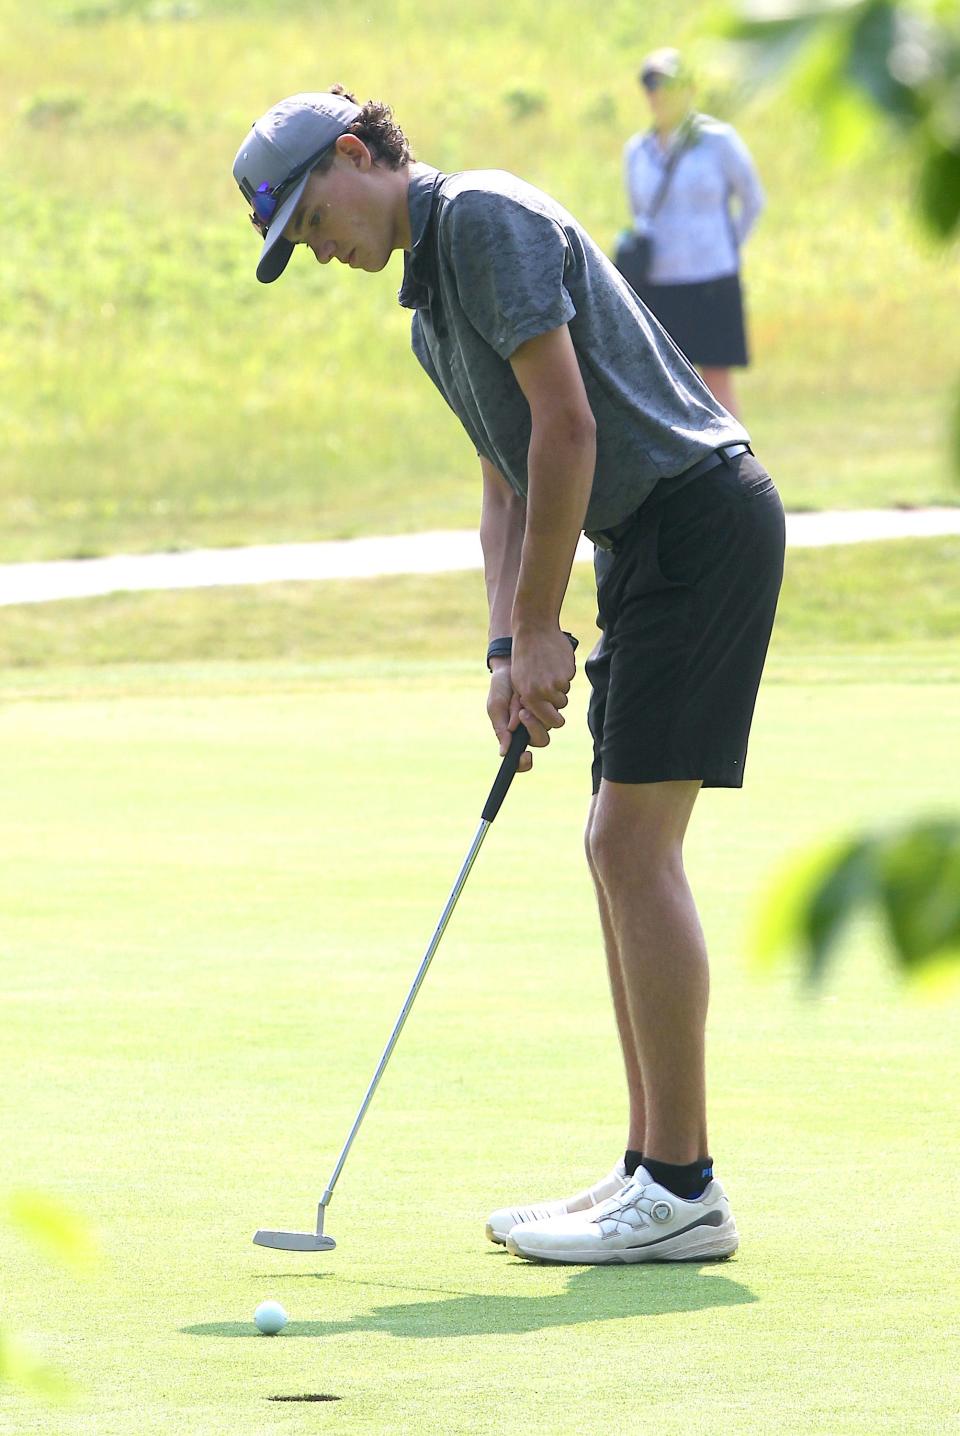 Indiana high school golfer Happy Gilmore — yes that’s his name — has